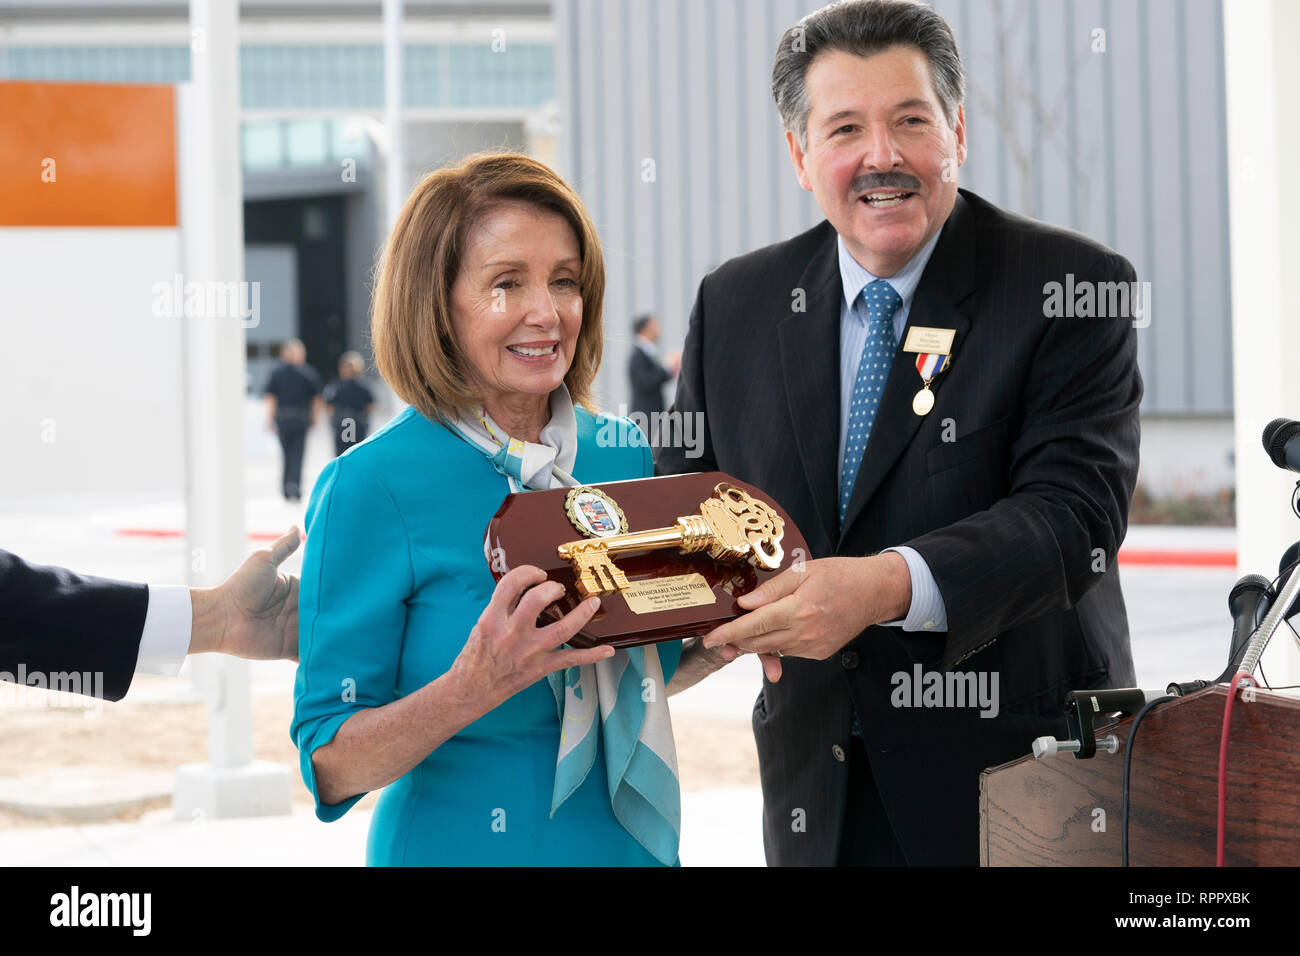 United States House of Representatives Speaker Nancy Pelosi (D-CA), receives a key to the city from Laredo Mayor Pete Saenz, right, as Laredo Congressman Henry Cuellar applauds during a press conference at the border between Laredo and Nuevo Laredo, Tamaulipas, Mexico. Stock Photo